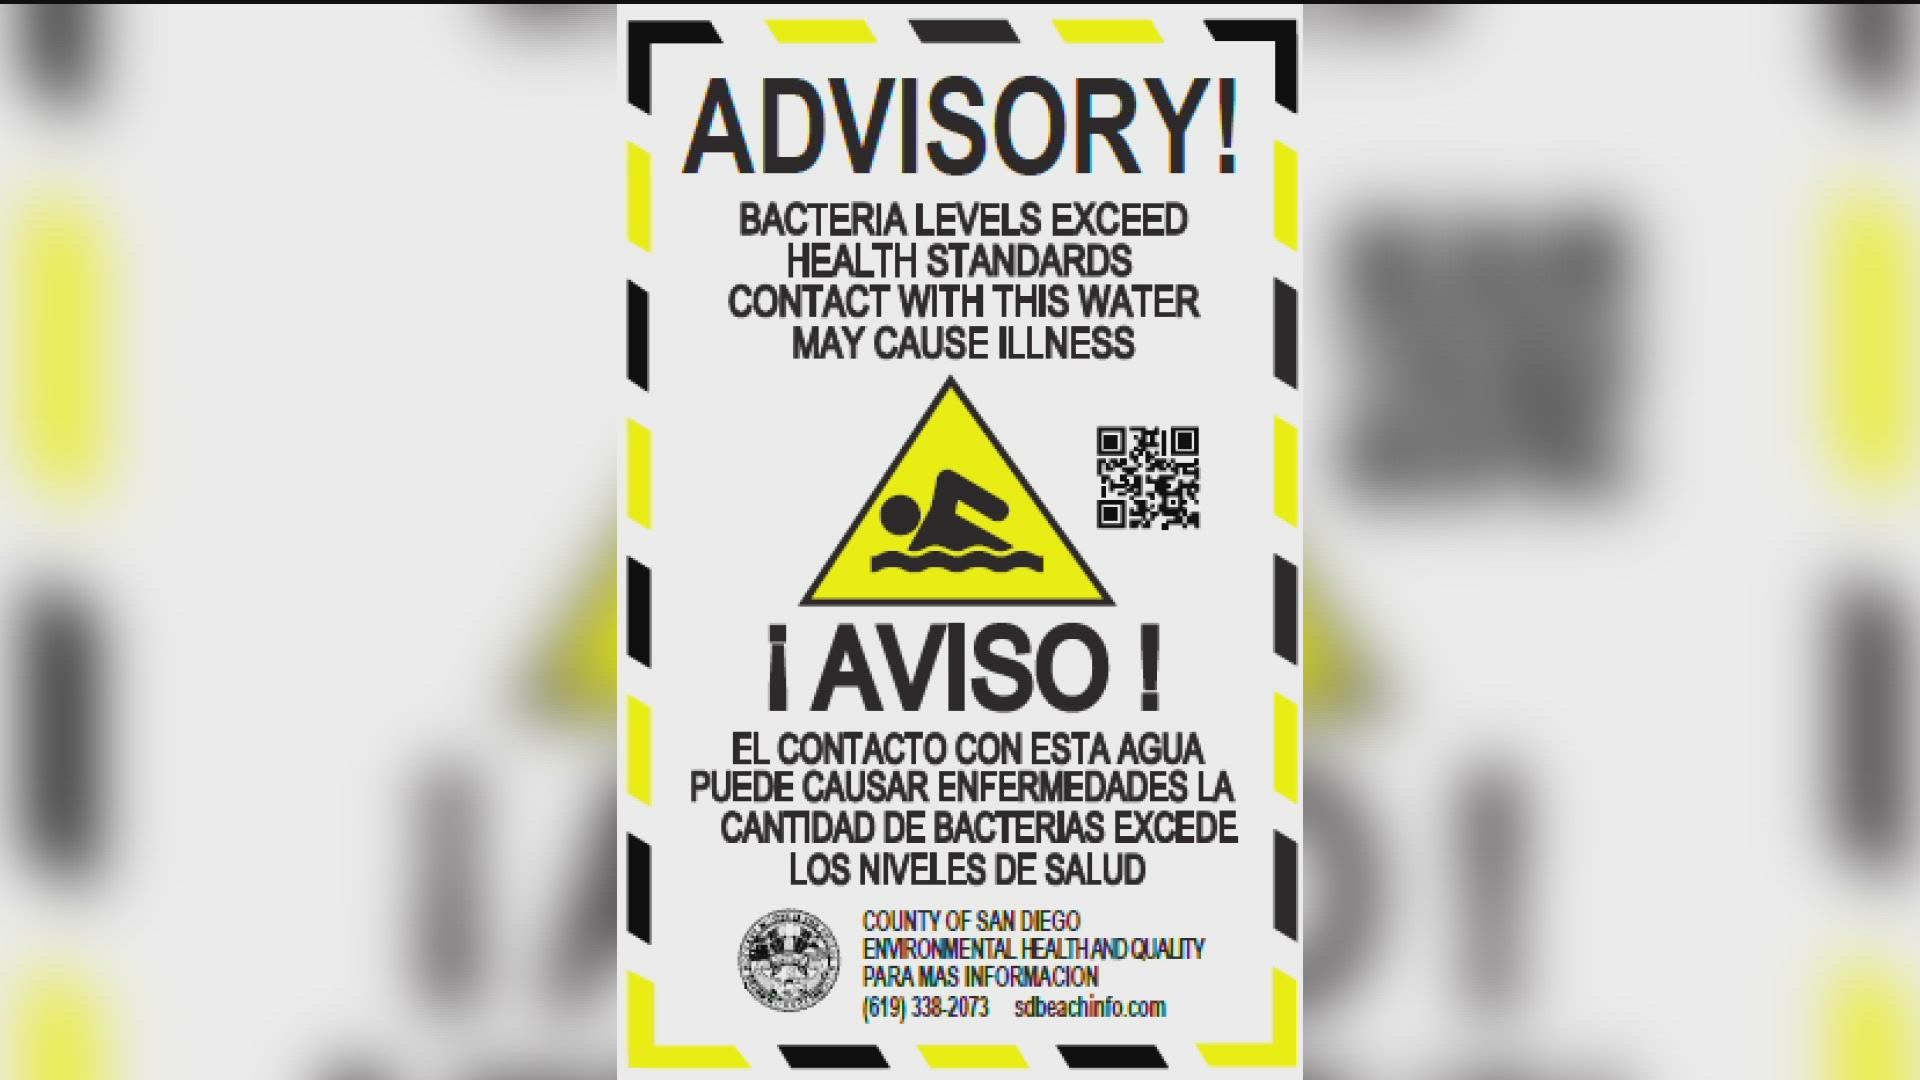 Warning signs will tell beachgoers that beach water may contain sewage and may cause illness if people come into contact with it.